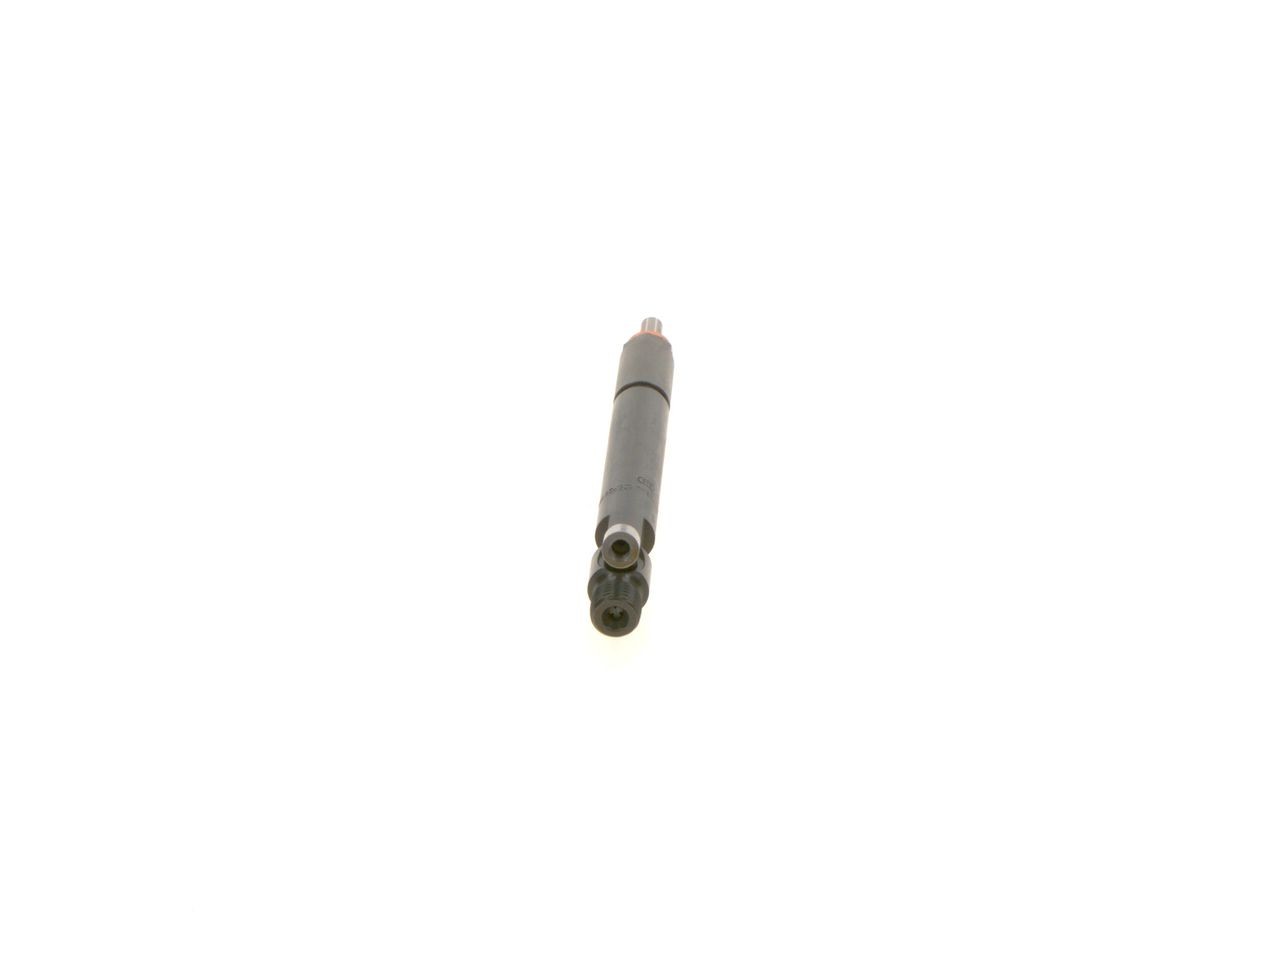 BOSCH 0 432 191 595 Nozzle and Holder Assembly